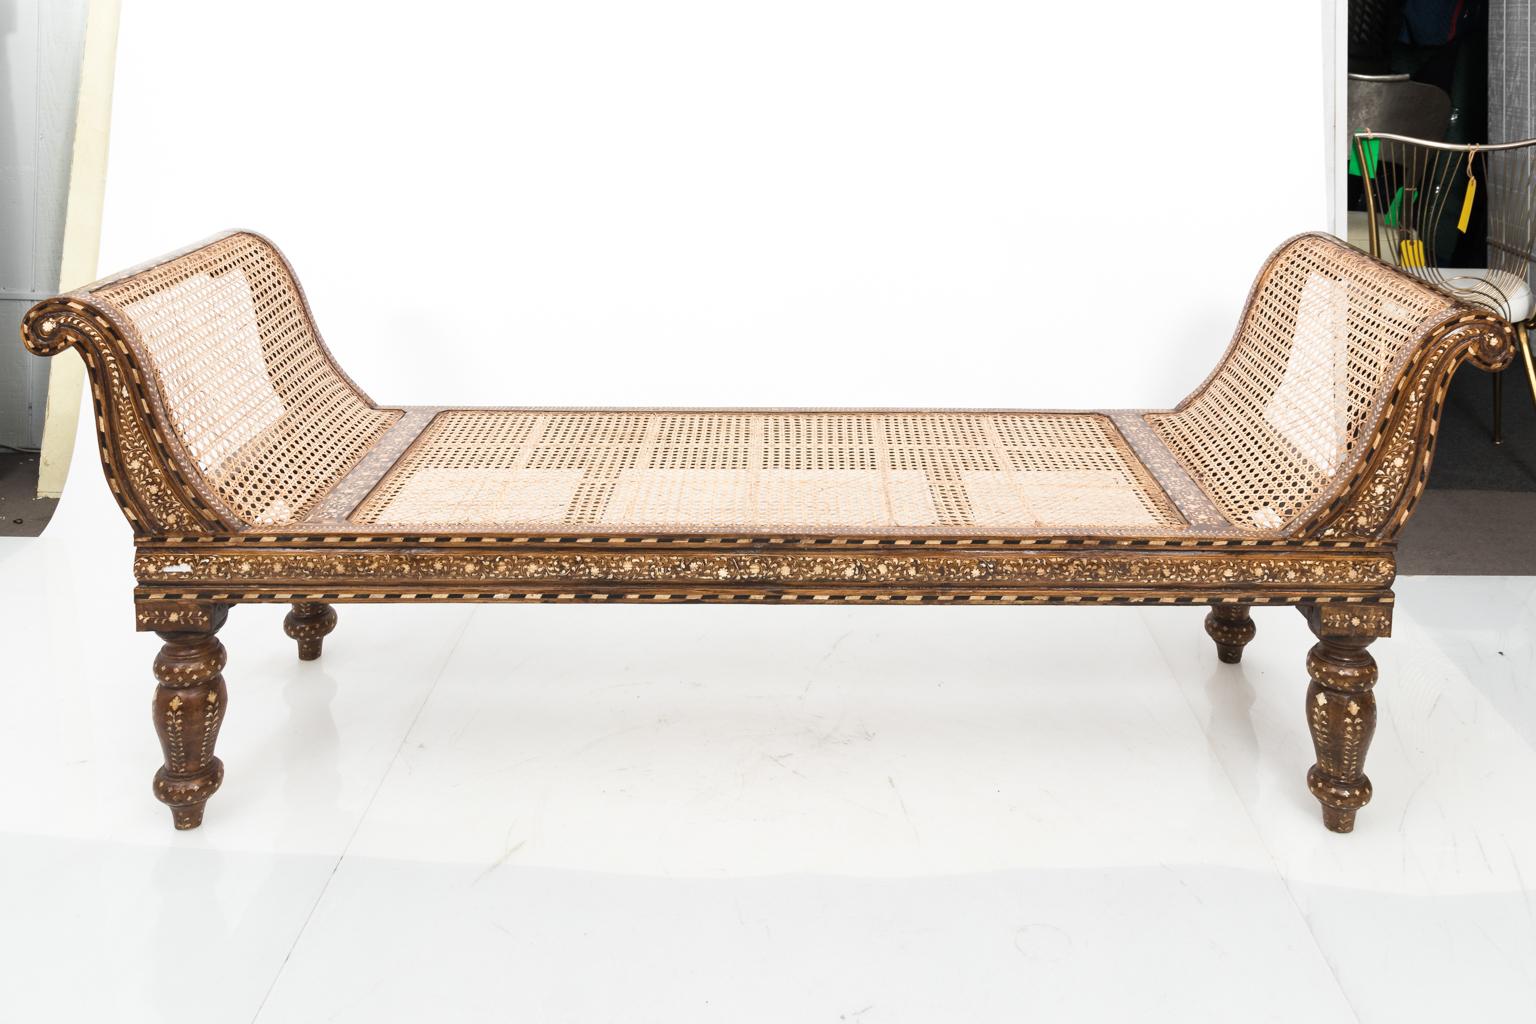 Anglo-Indian wood and bone inlaid bench with cane woven seat and bulb turned legs, circa 20th century. The inlay also features floral detail throughout.